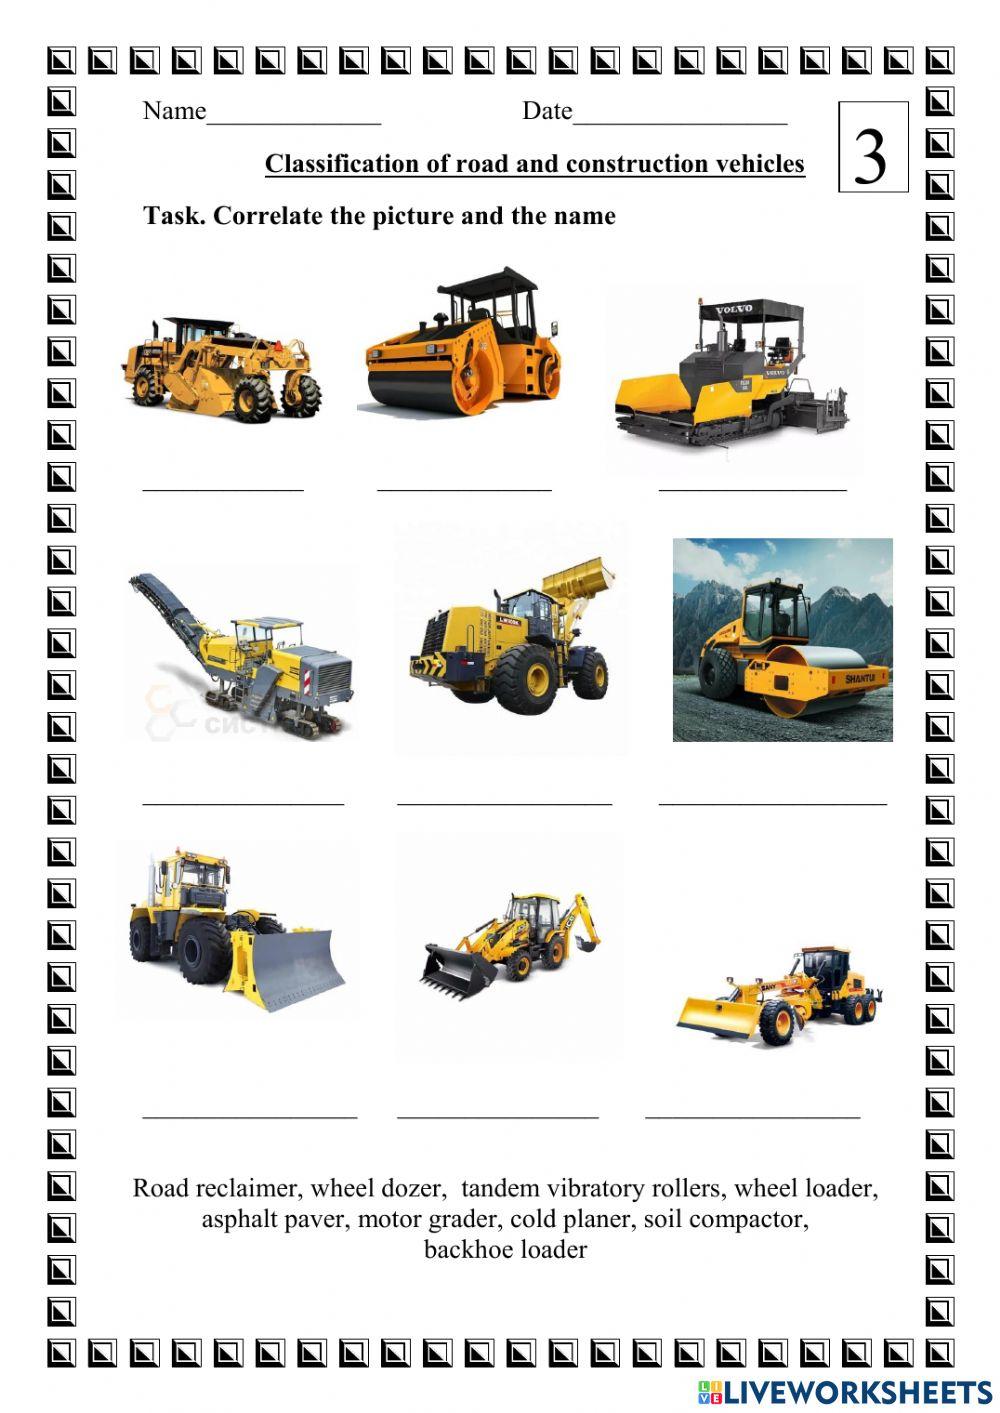 Classification of road and construction vihicles